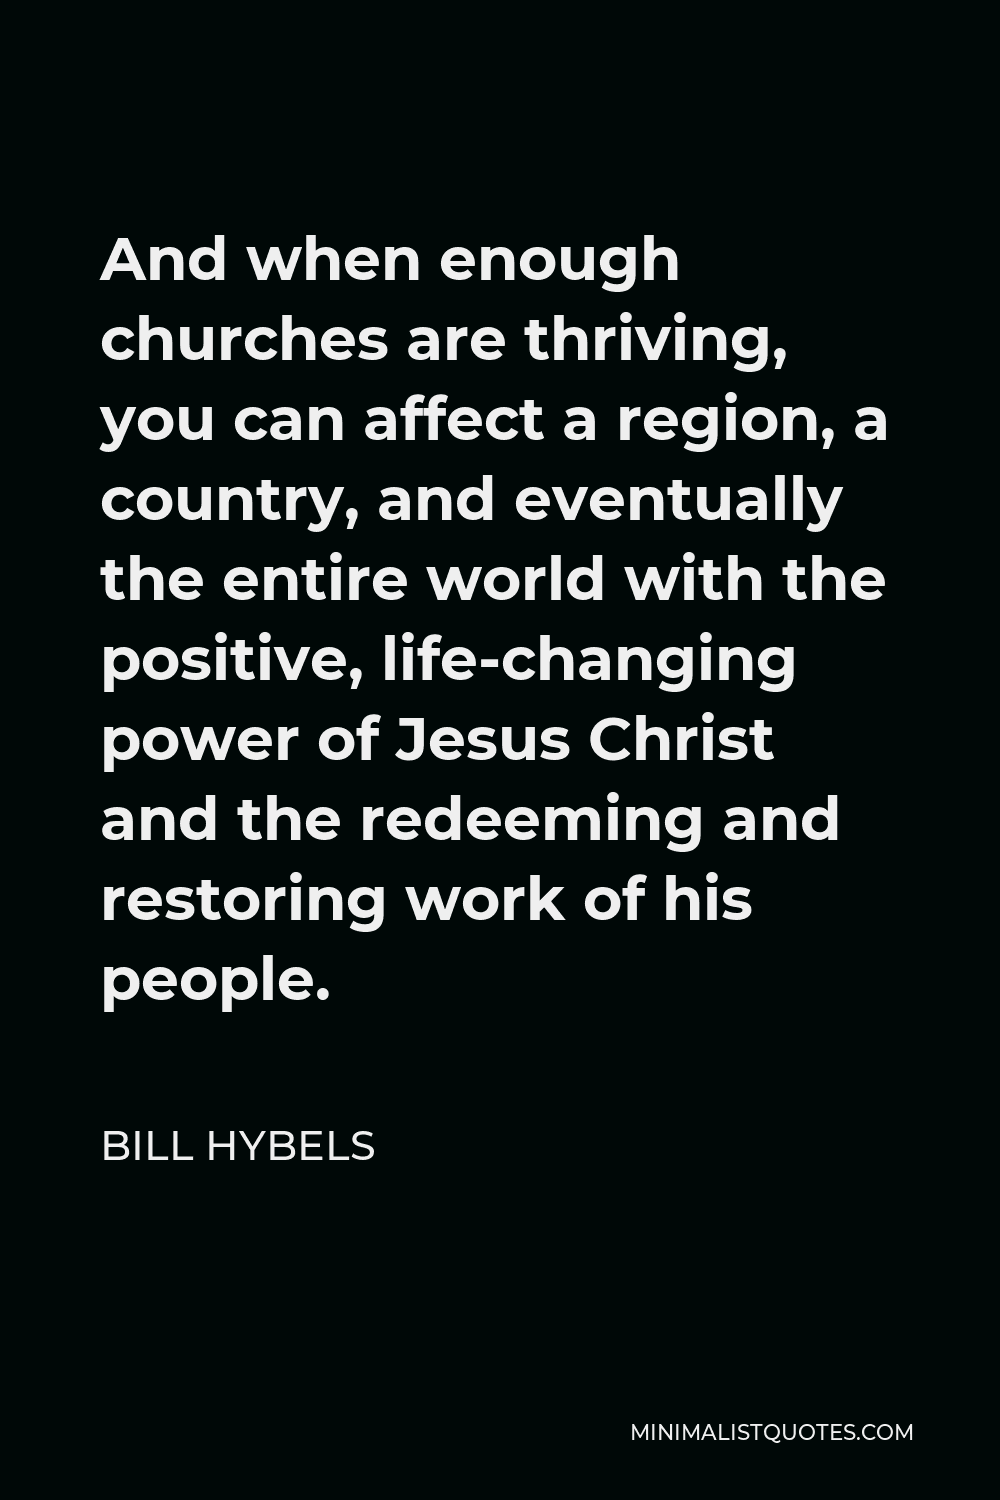 Bill Hybels Quote - And when enough churches are thriving, you can affect a region, a country, and eventually the entire world with the positive, life-changing power of Jesus Christ and the redeeming and restoring work of his people.